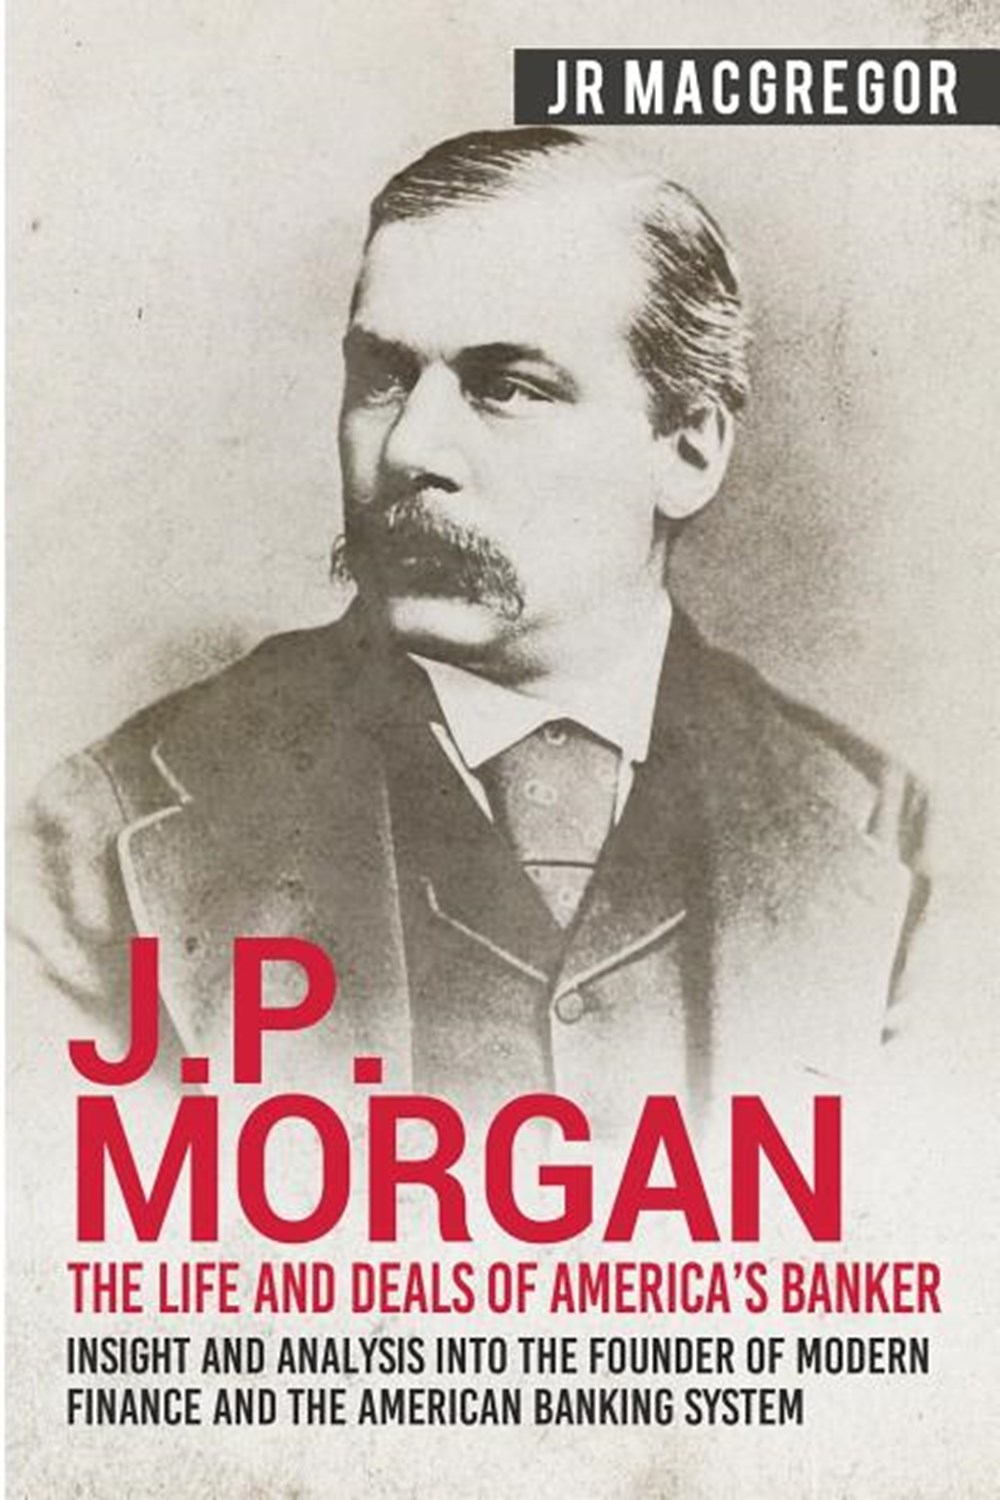 J.P. Morgan - The Life and Deals of America's Banker: Insight and Analysis into the Founder of Moder